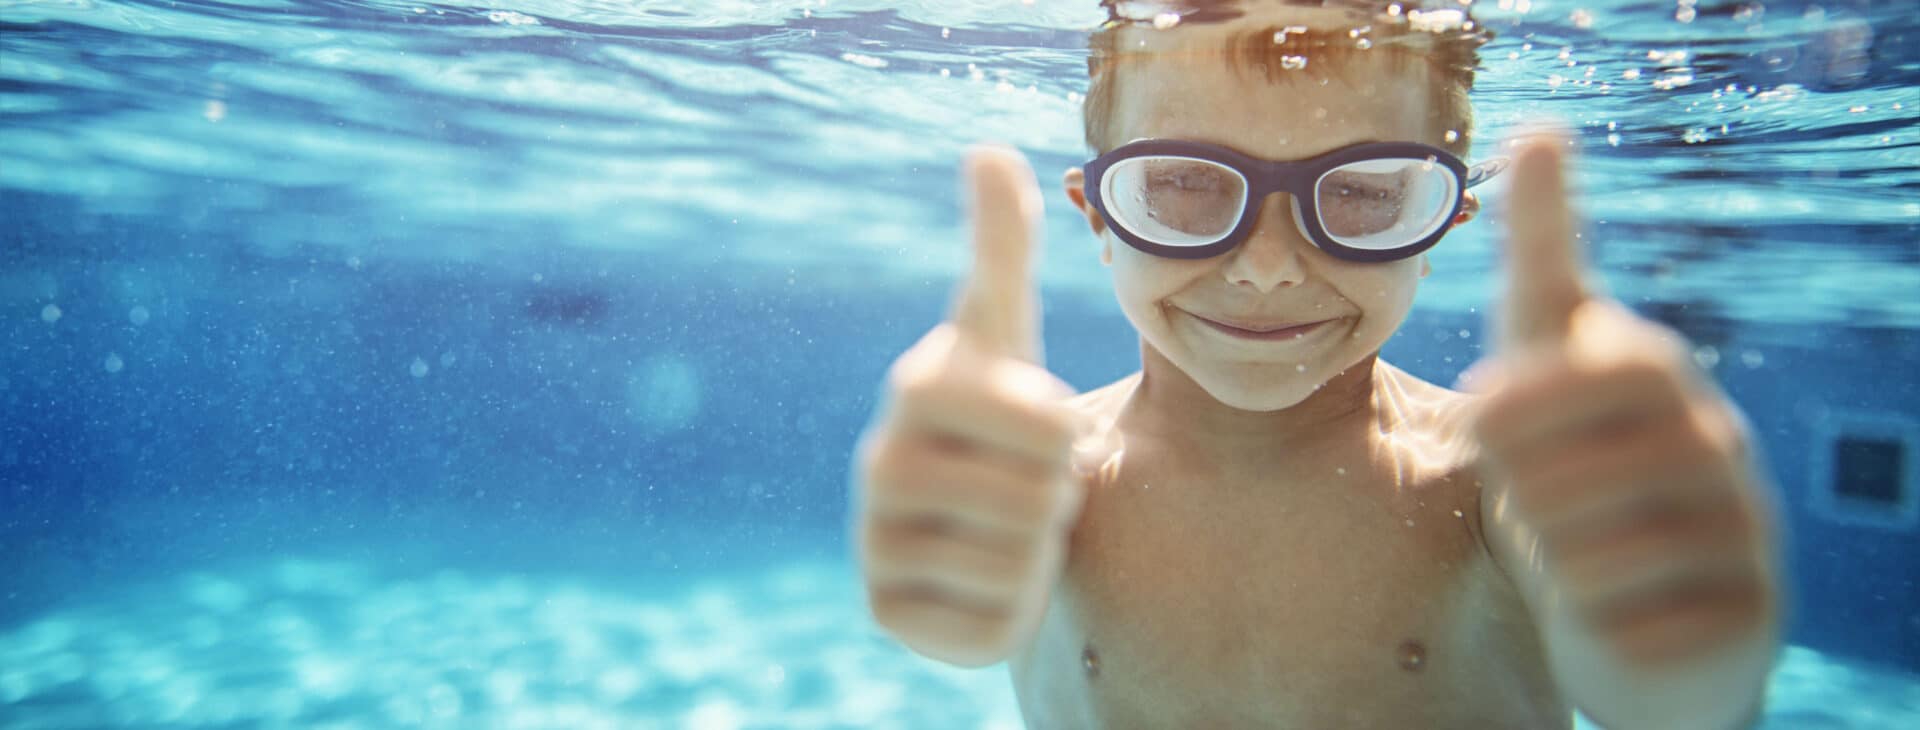 Little boy in pool showing thumbs up